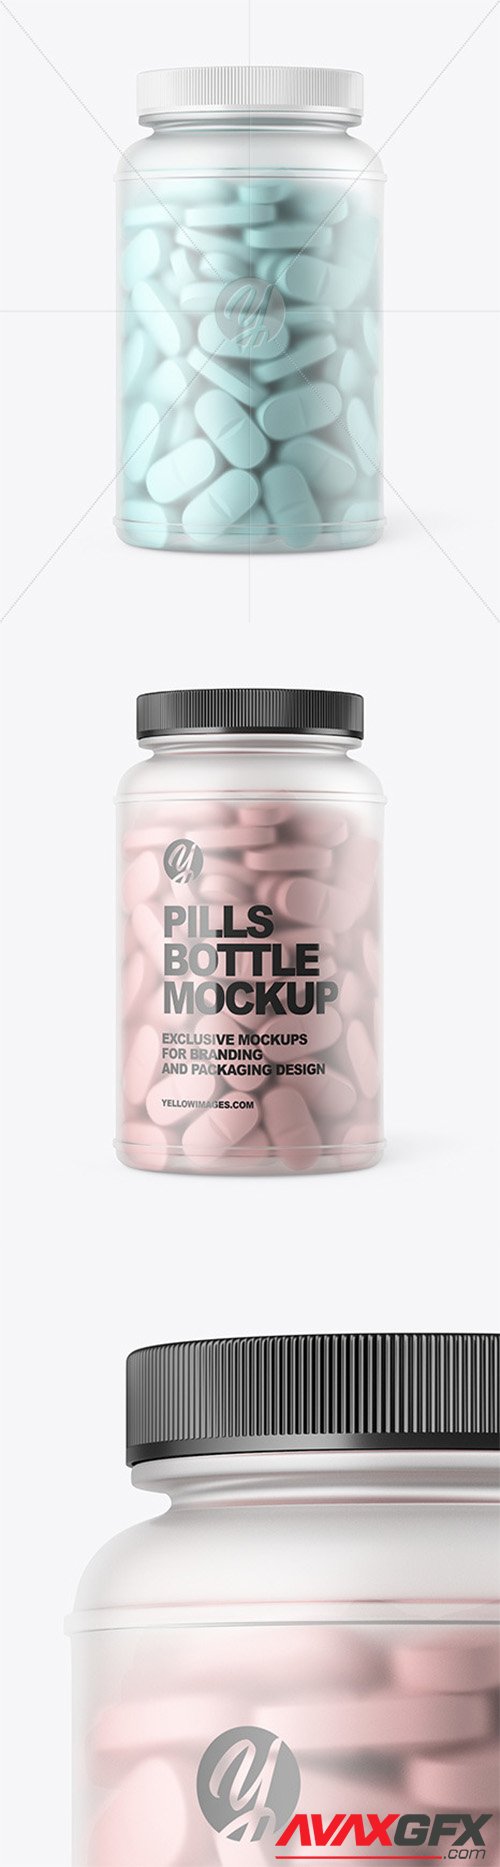 Download Frosted Pills Bottle Mockup 60399 Avaxgfx All Downloads That You Need In One Place Graphic From Nitroflare Rapidgator PSD Mockup Templates